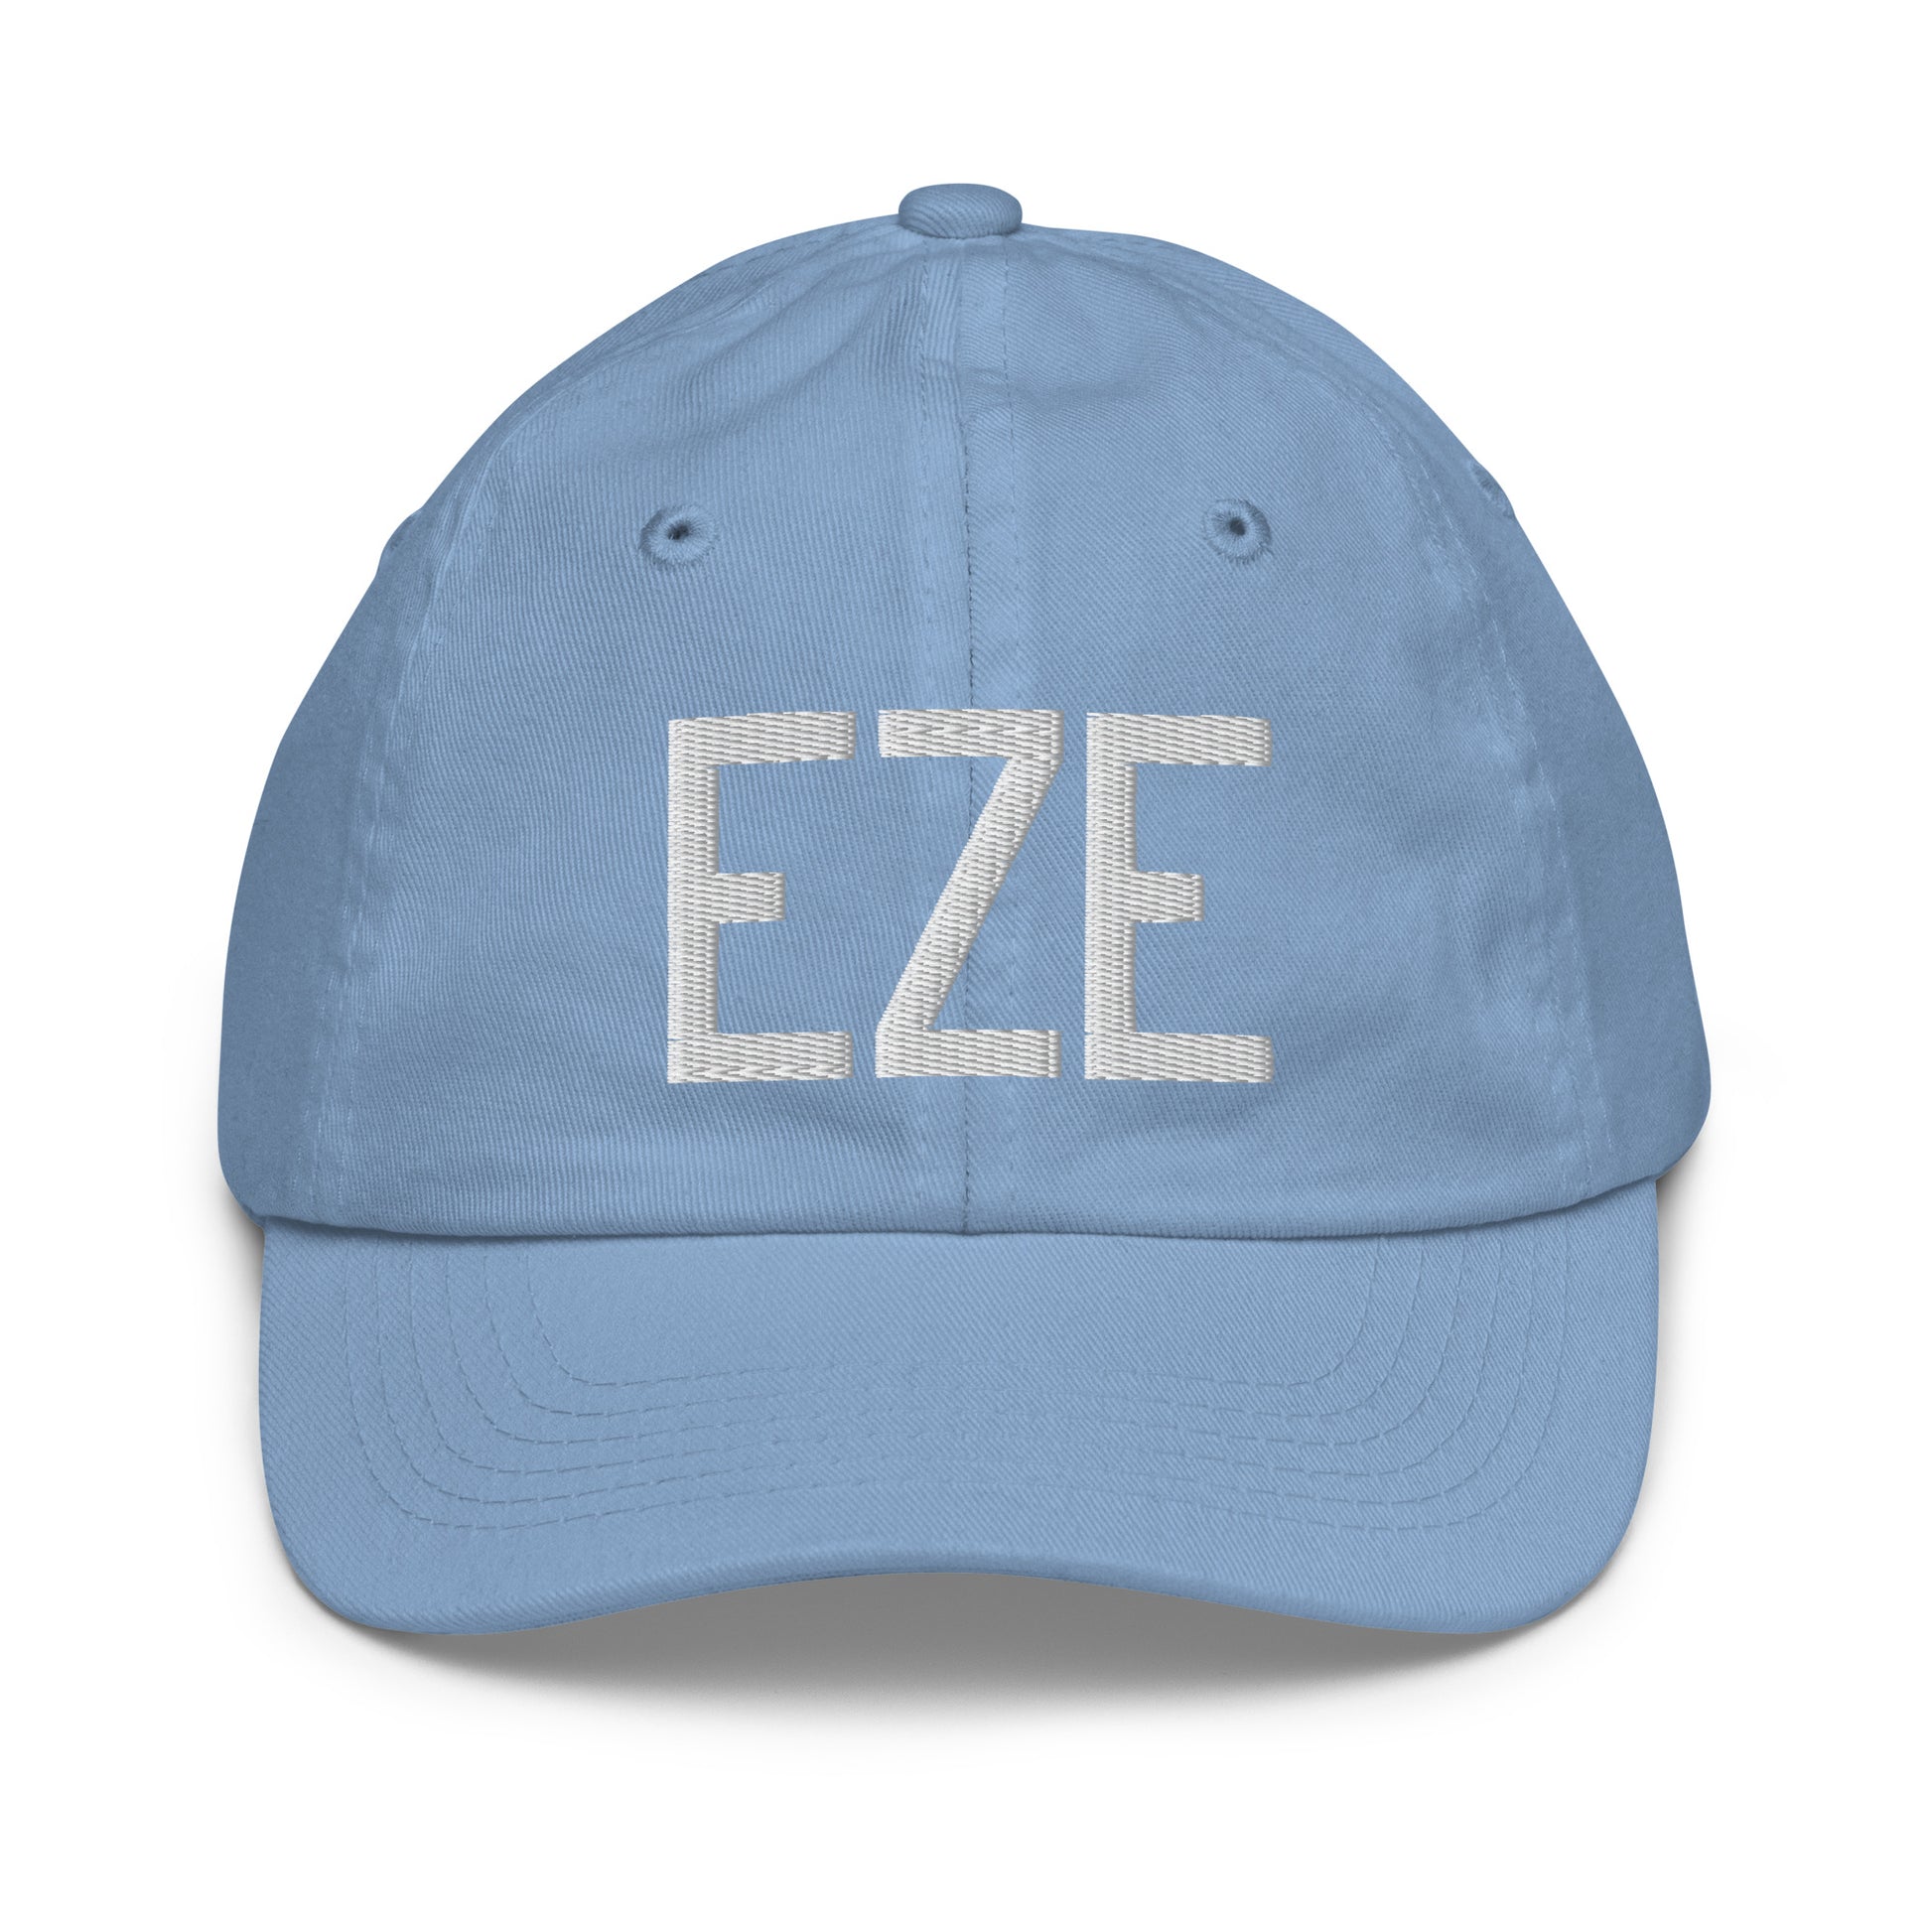 Airport Code Kid's Baseball Cap - White • EZE Buenos Aires • YHM Designs - Image 22